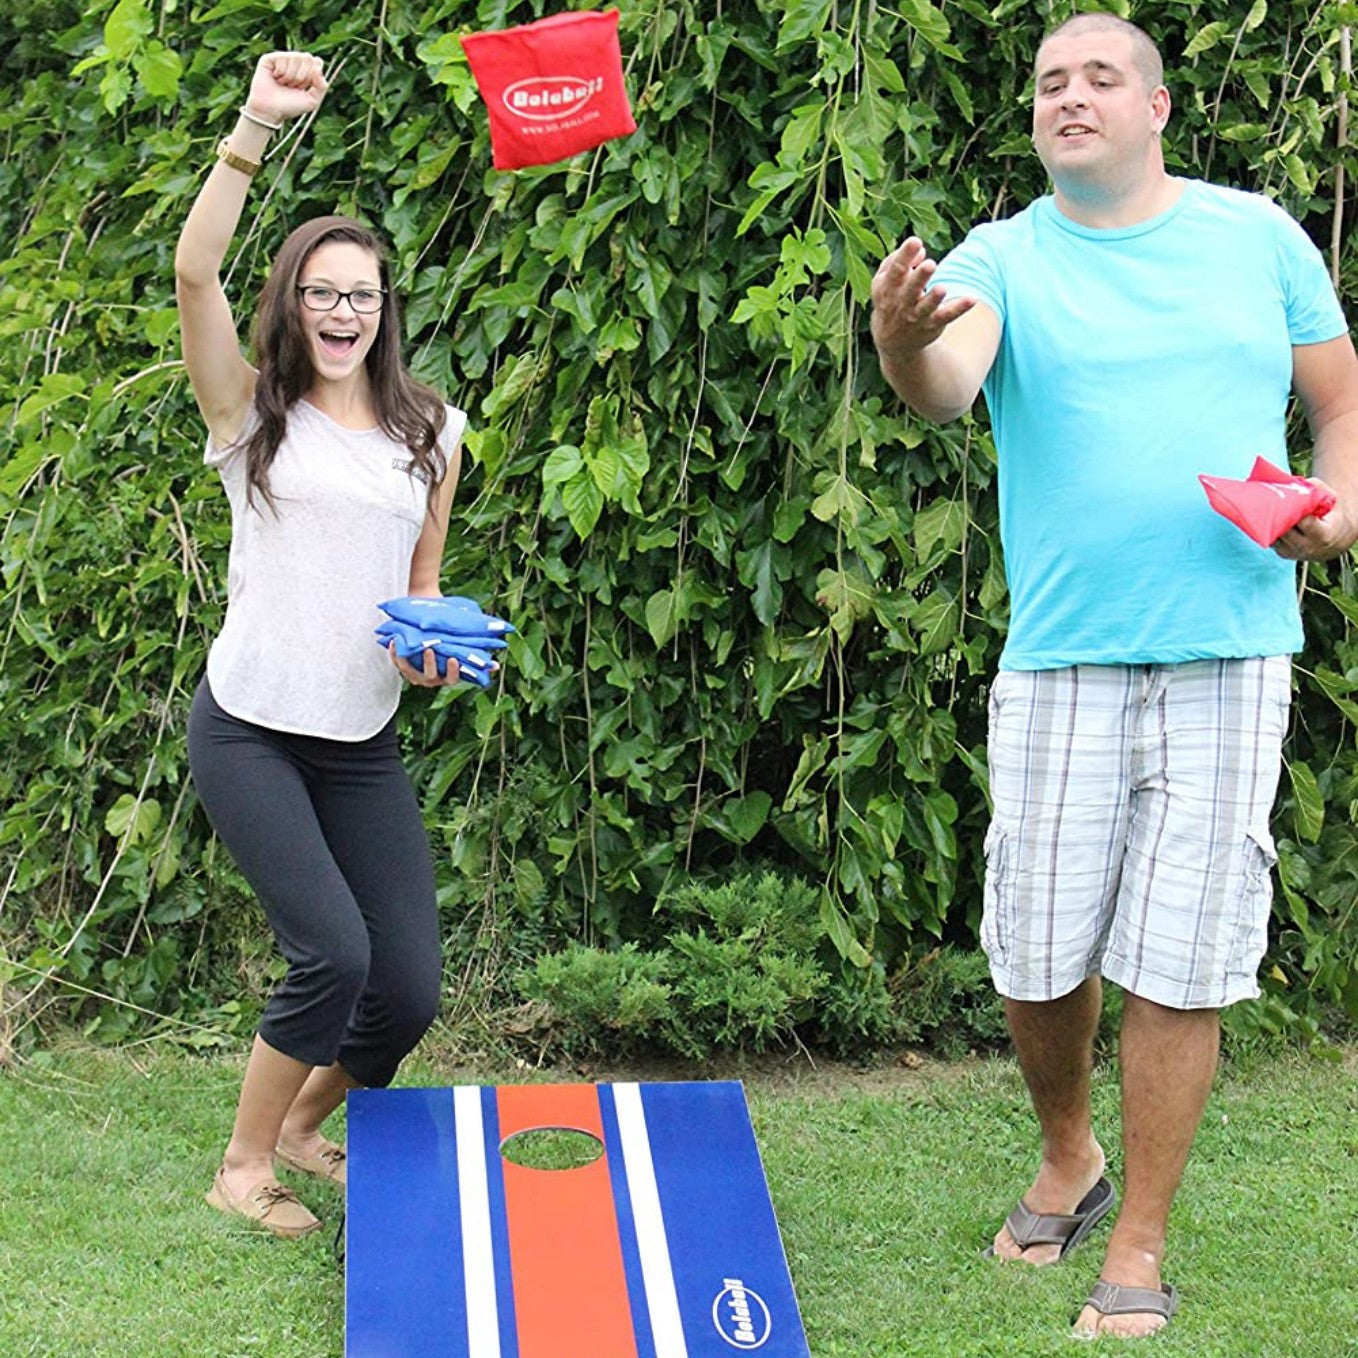 Cornhole Carnival: Elevate Playtime with Bolaball's Toss Game Set